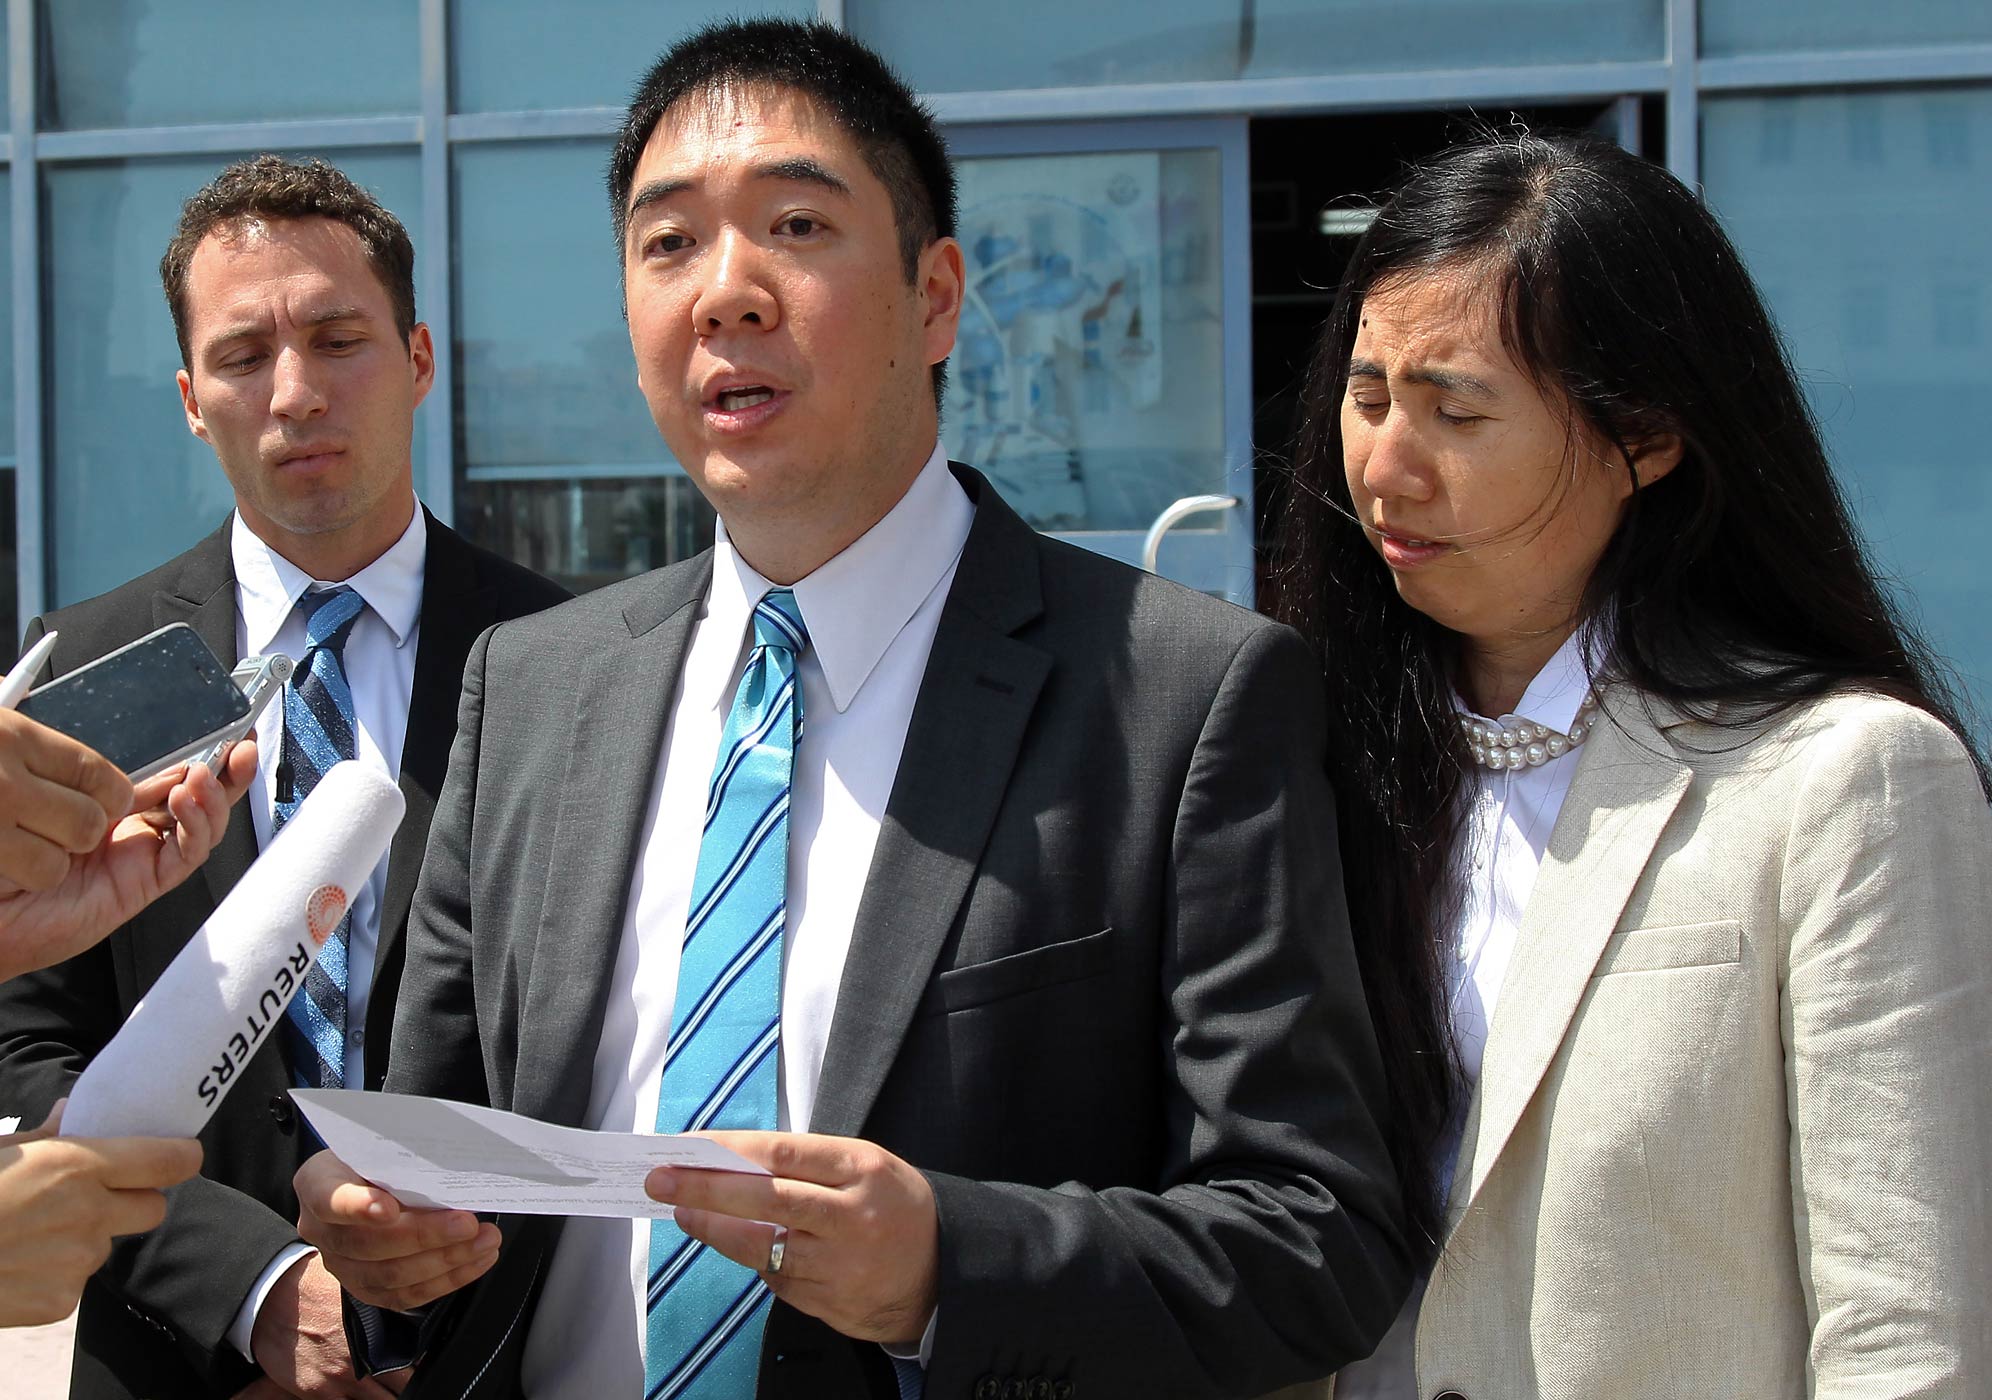 Matthew, left, and Grace Huang, an American couple charged with starving to death their 8-year-old adopted daughter, speak to the press outside the a courthouse before their trial in Doha, Qatar, Thursday, March 27, 2014. (Osama Faisal—AP)